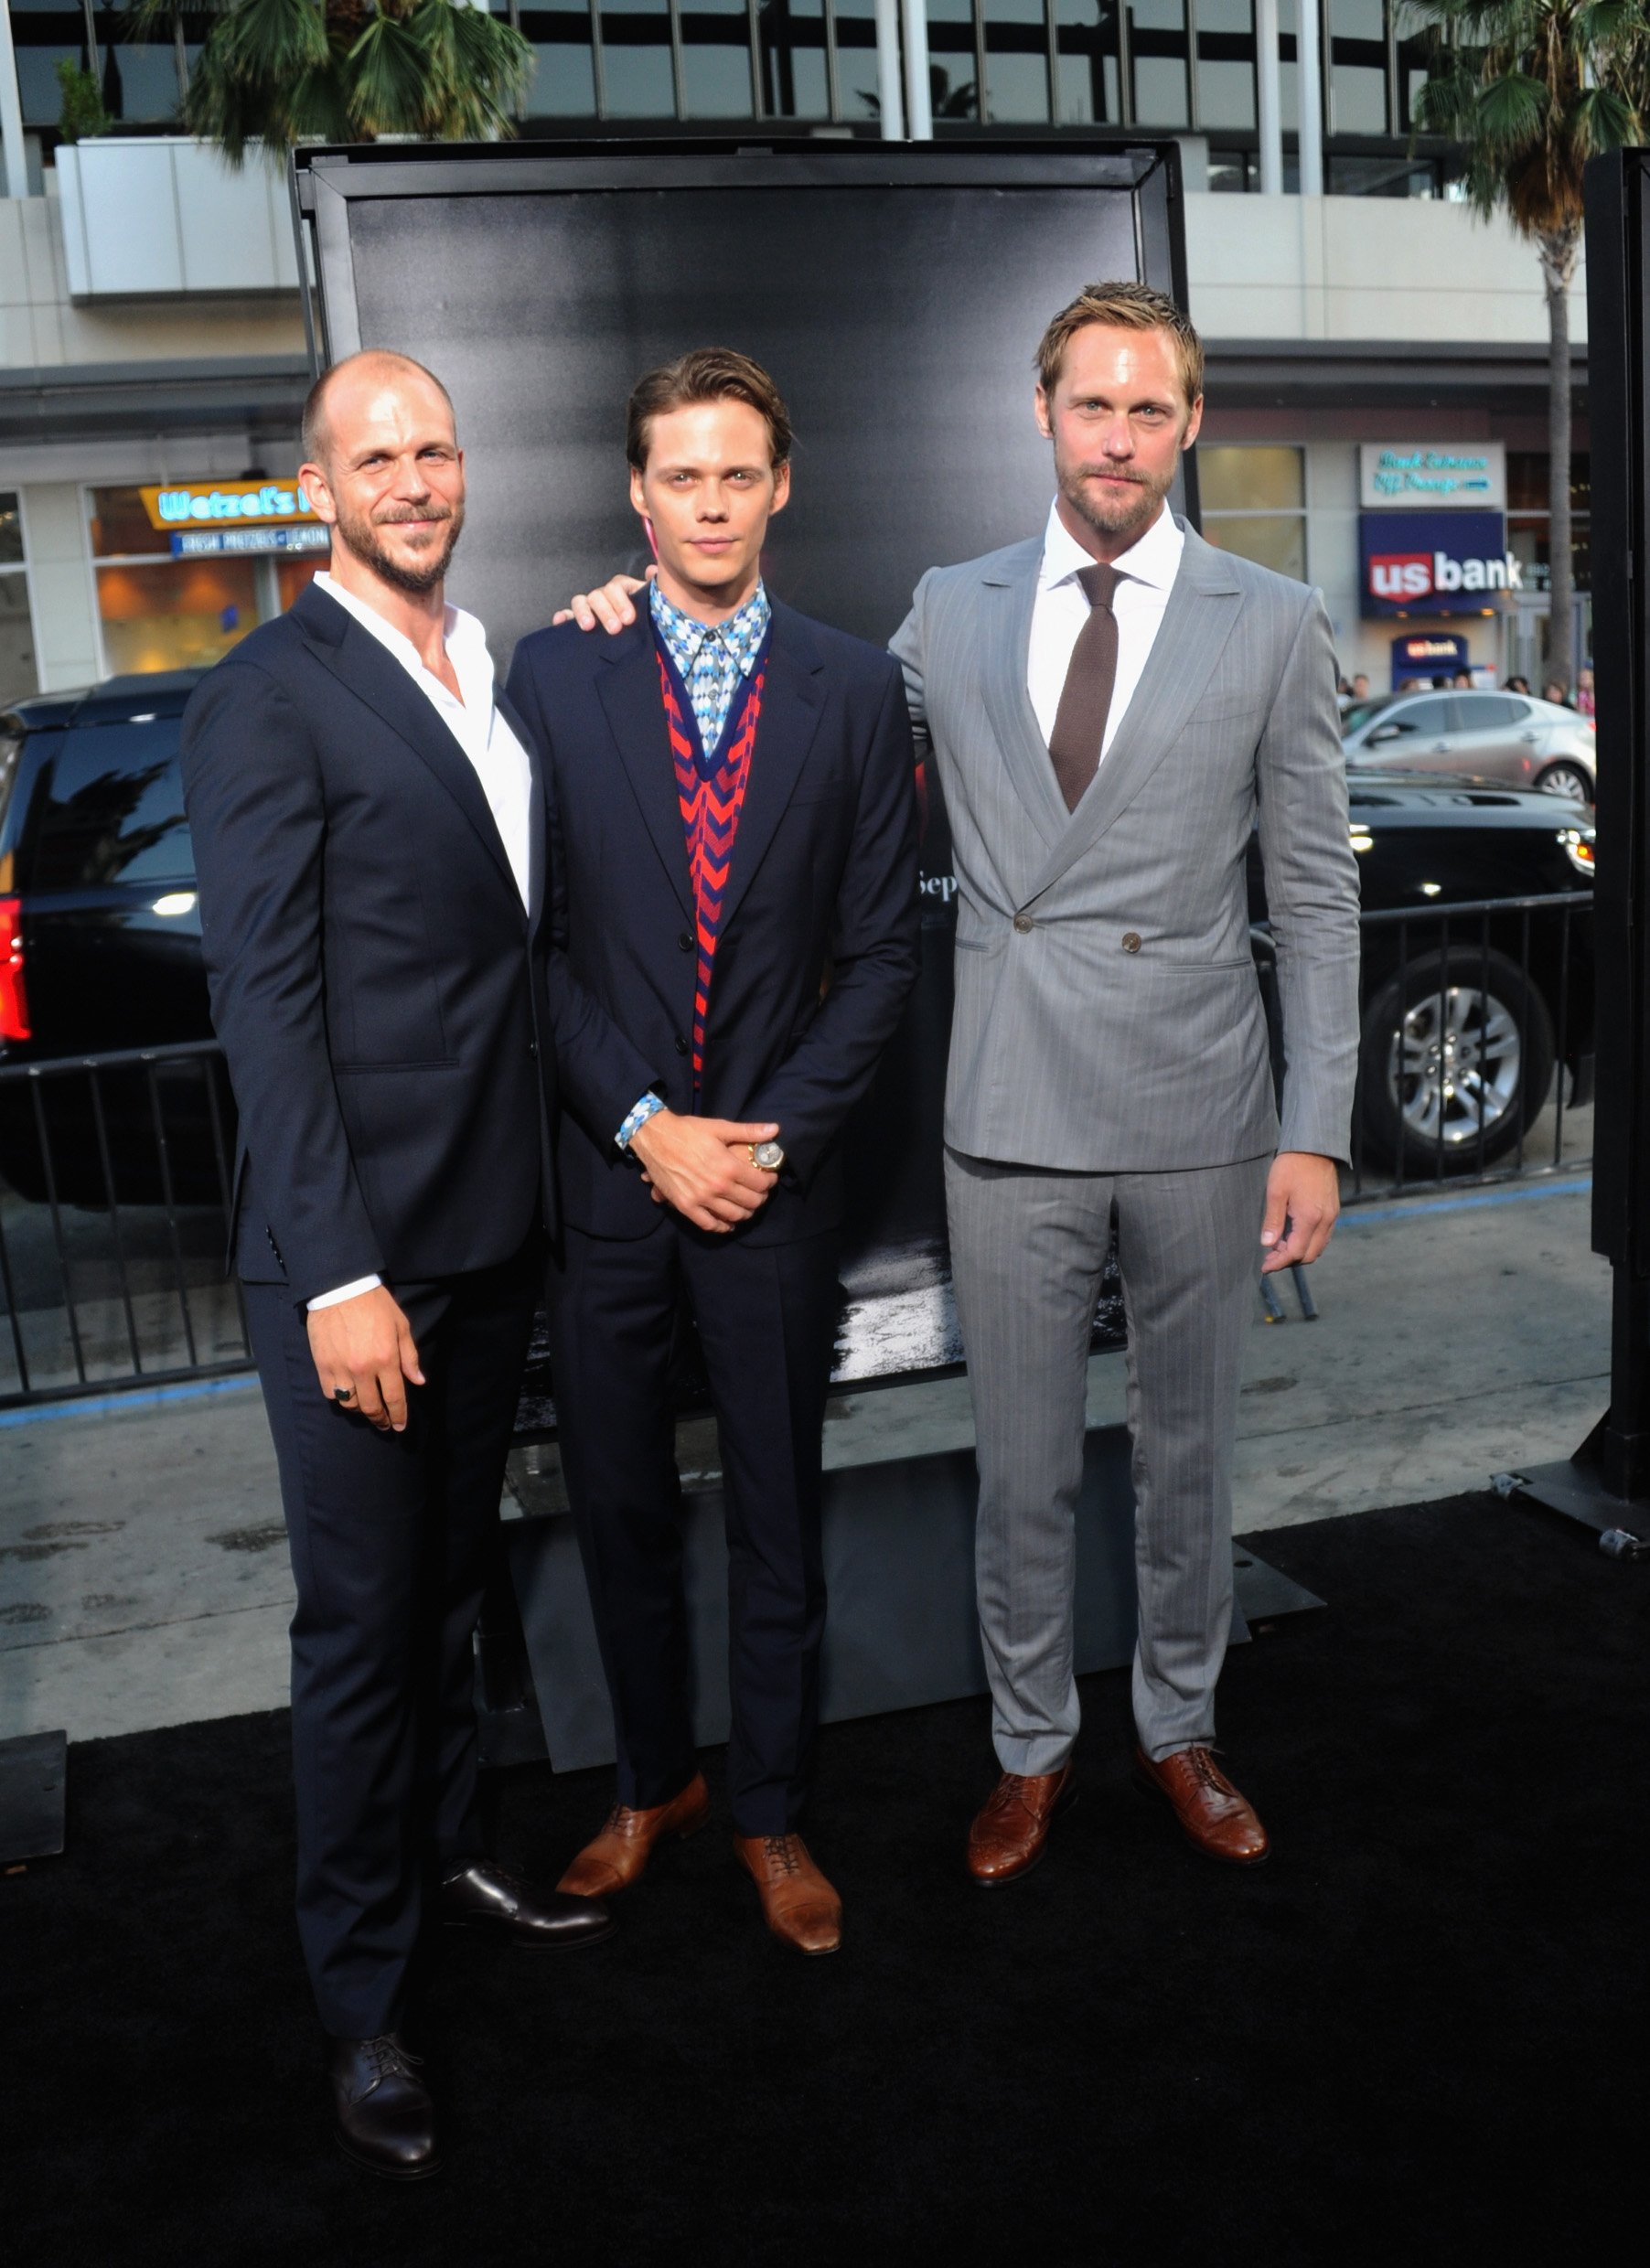  Actors/brothers Gustaf Skarsgard, Bill Skarsgard and Alexander Skarsgard arrives for the Premiere Of Warner Bros. Pictures And New Line Cinema's "It" held at TCL Chinese Theatre on September 5, 2017 in Hollywood, California. | Source: Getty Images